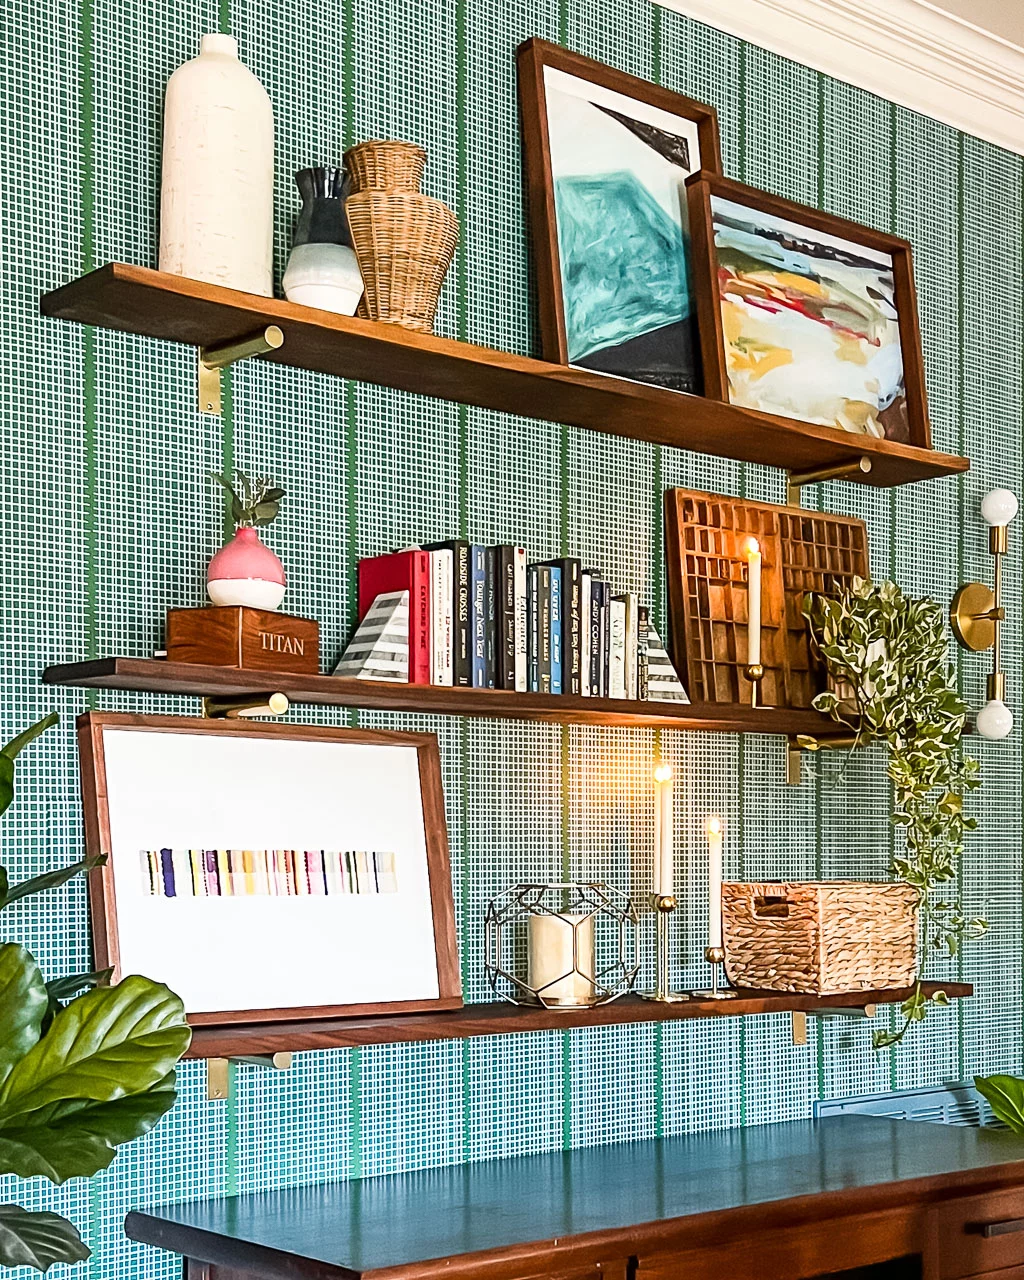 DIY Wall-Mounted Shelving Systems Roundup